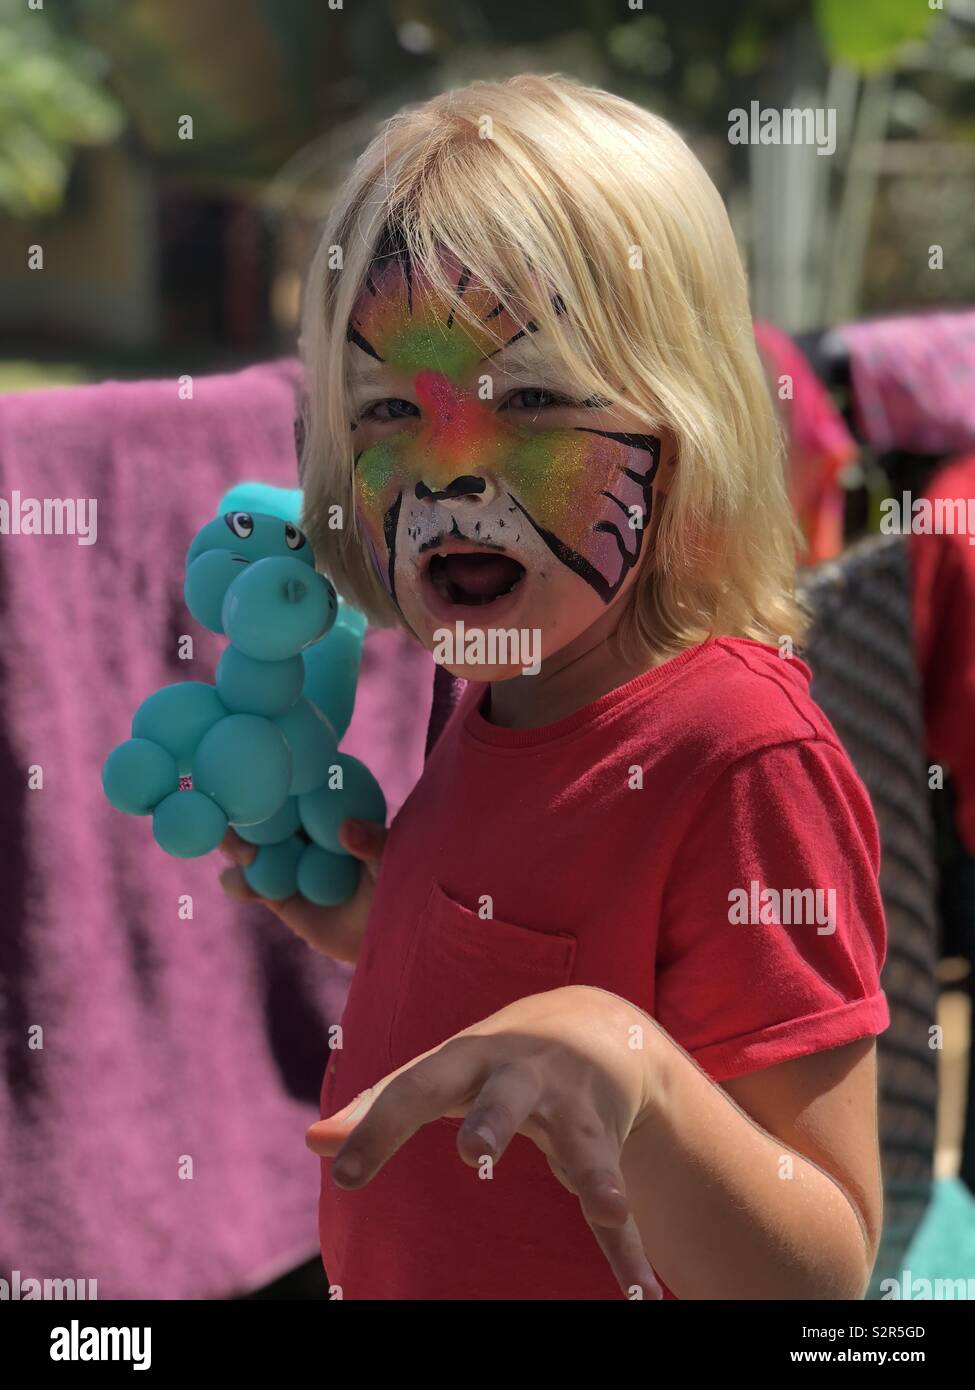 7 year old girl enjoys face paints and balloon animals at a birthday party Stock Photo